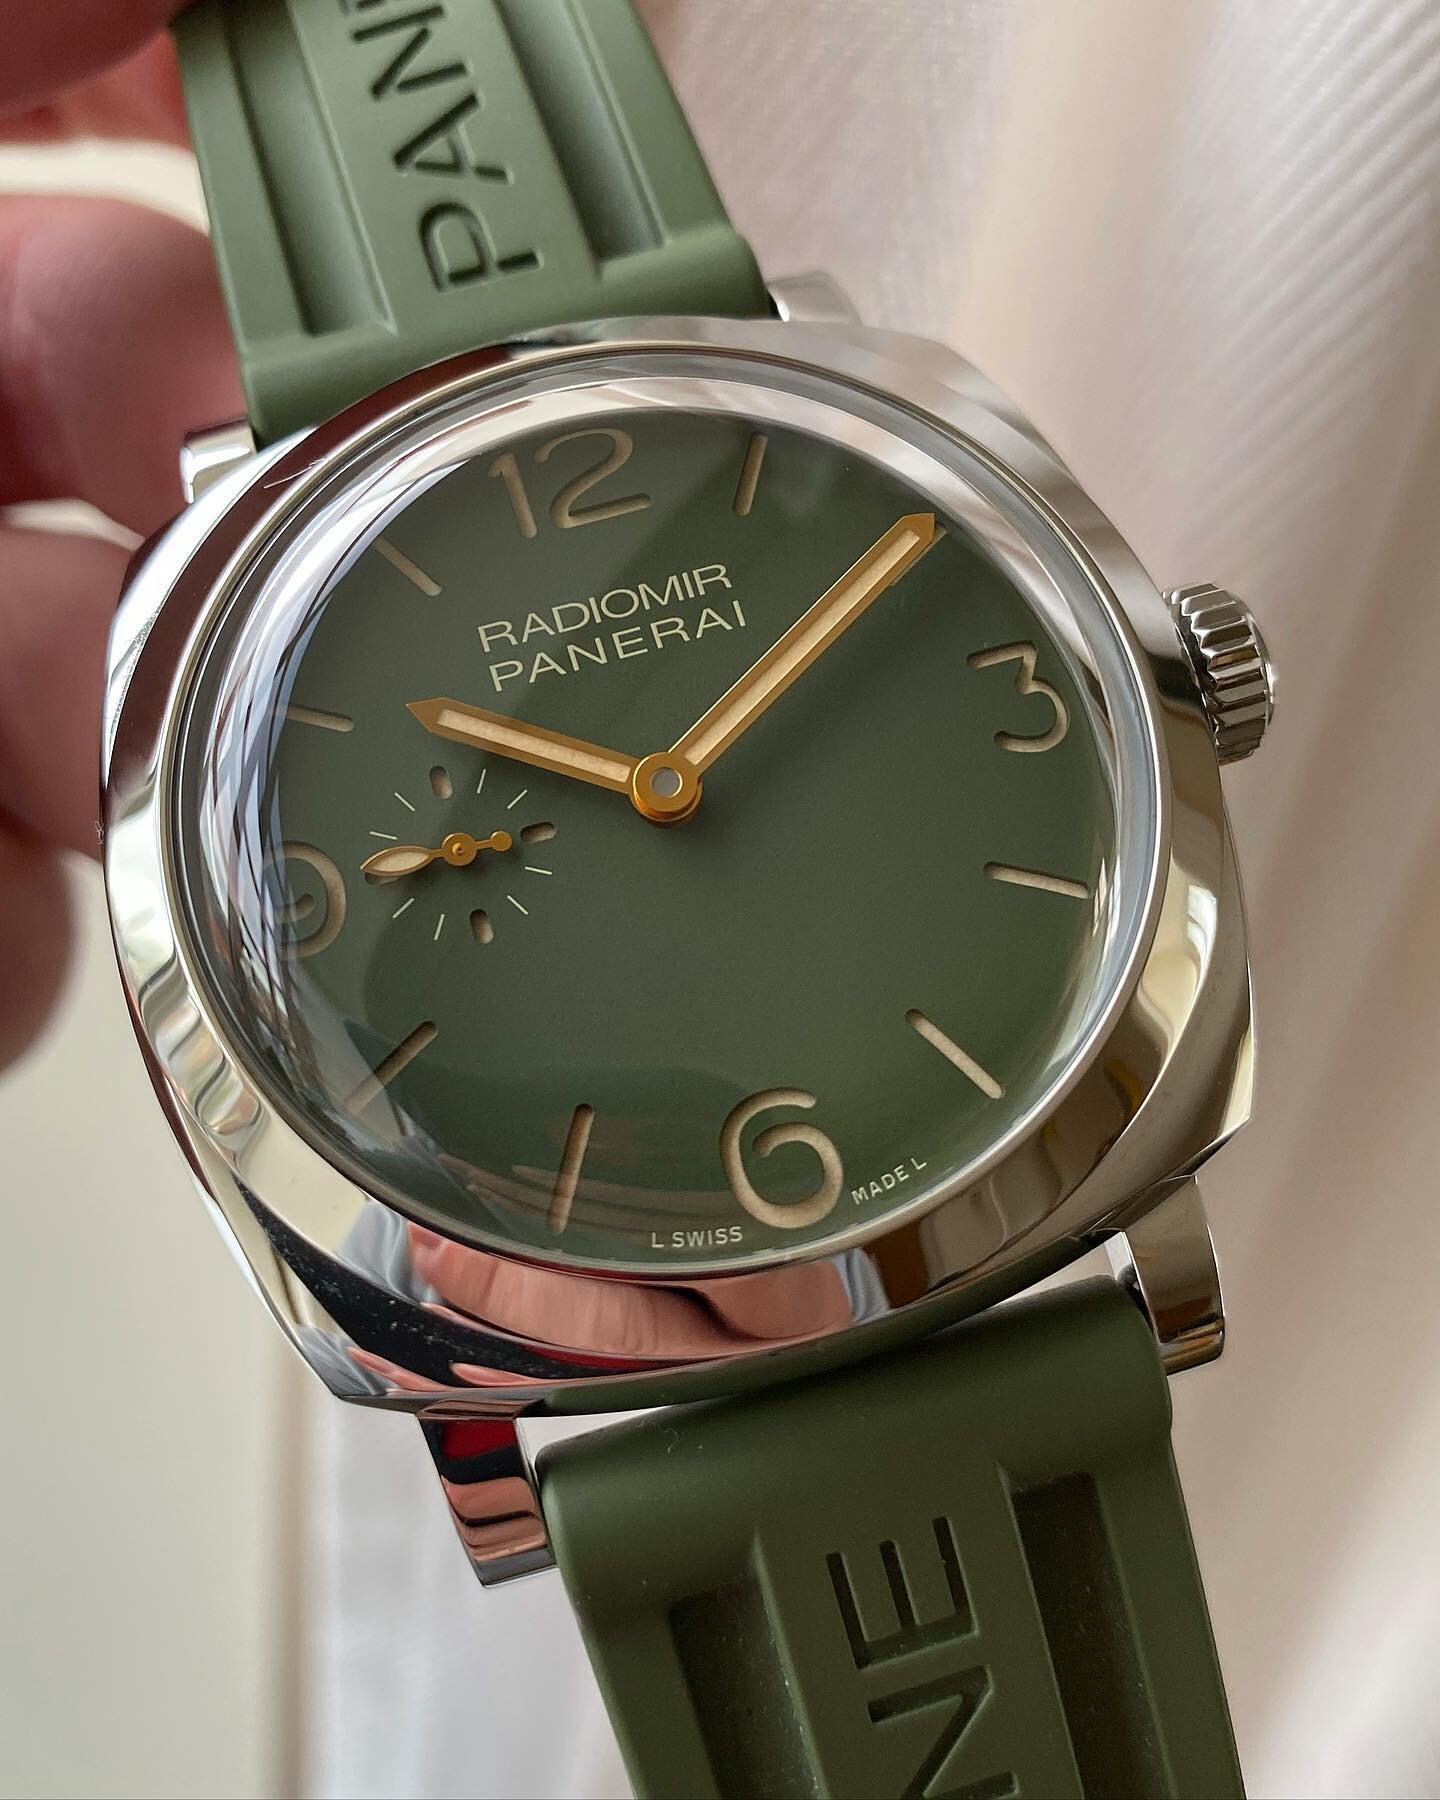 💚 NWA 💚 Introducing the PAM995, a beautiful green design with gold accents on the dial. ✨

Powered by the P.4000, the first automatic movement with an off-centre micro-rotor developed in Panerai Neuch&acirc;tel. Swipe to view! ➡️

Available SOON at